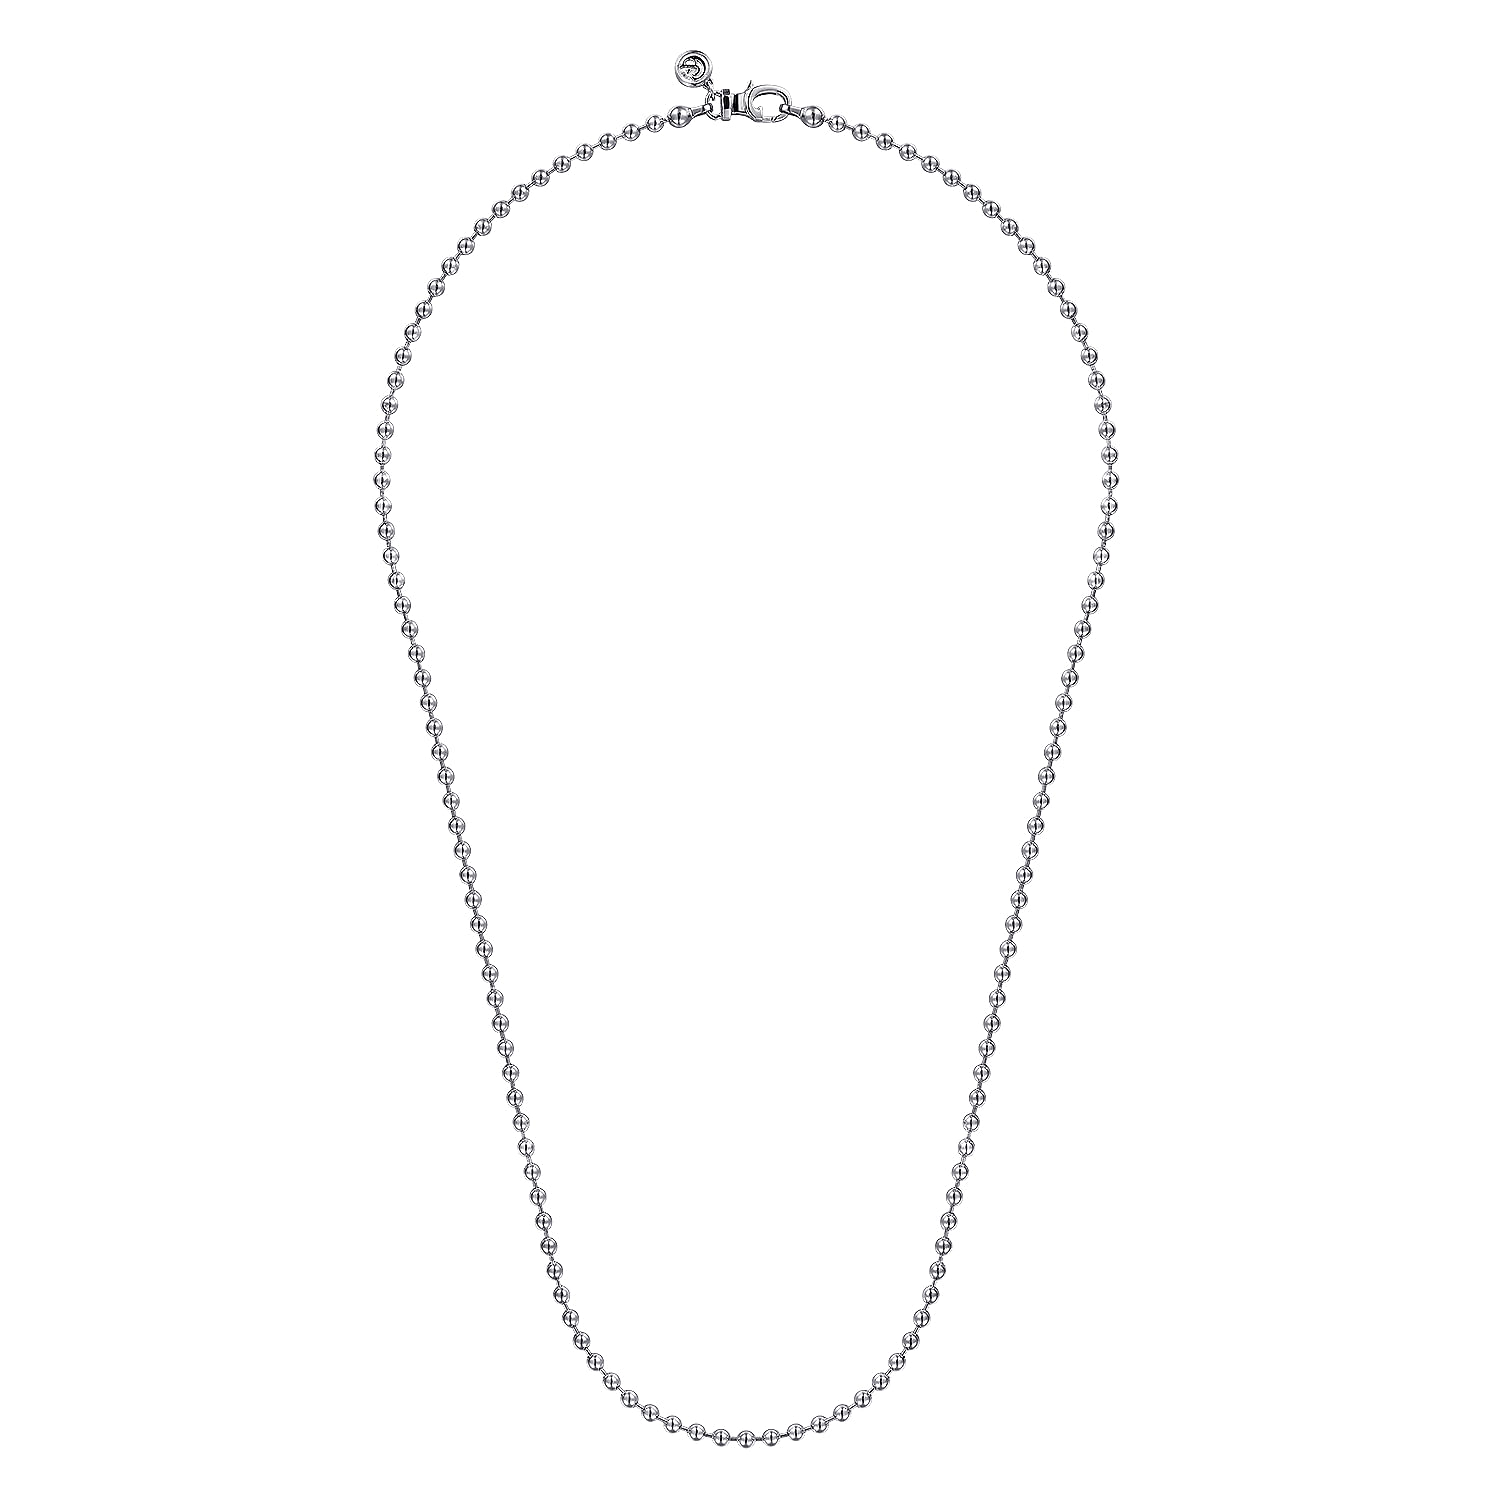 22 Inch 925 Sterling Silver 3mm Ball Hollow Chain Necklace